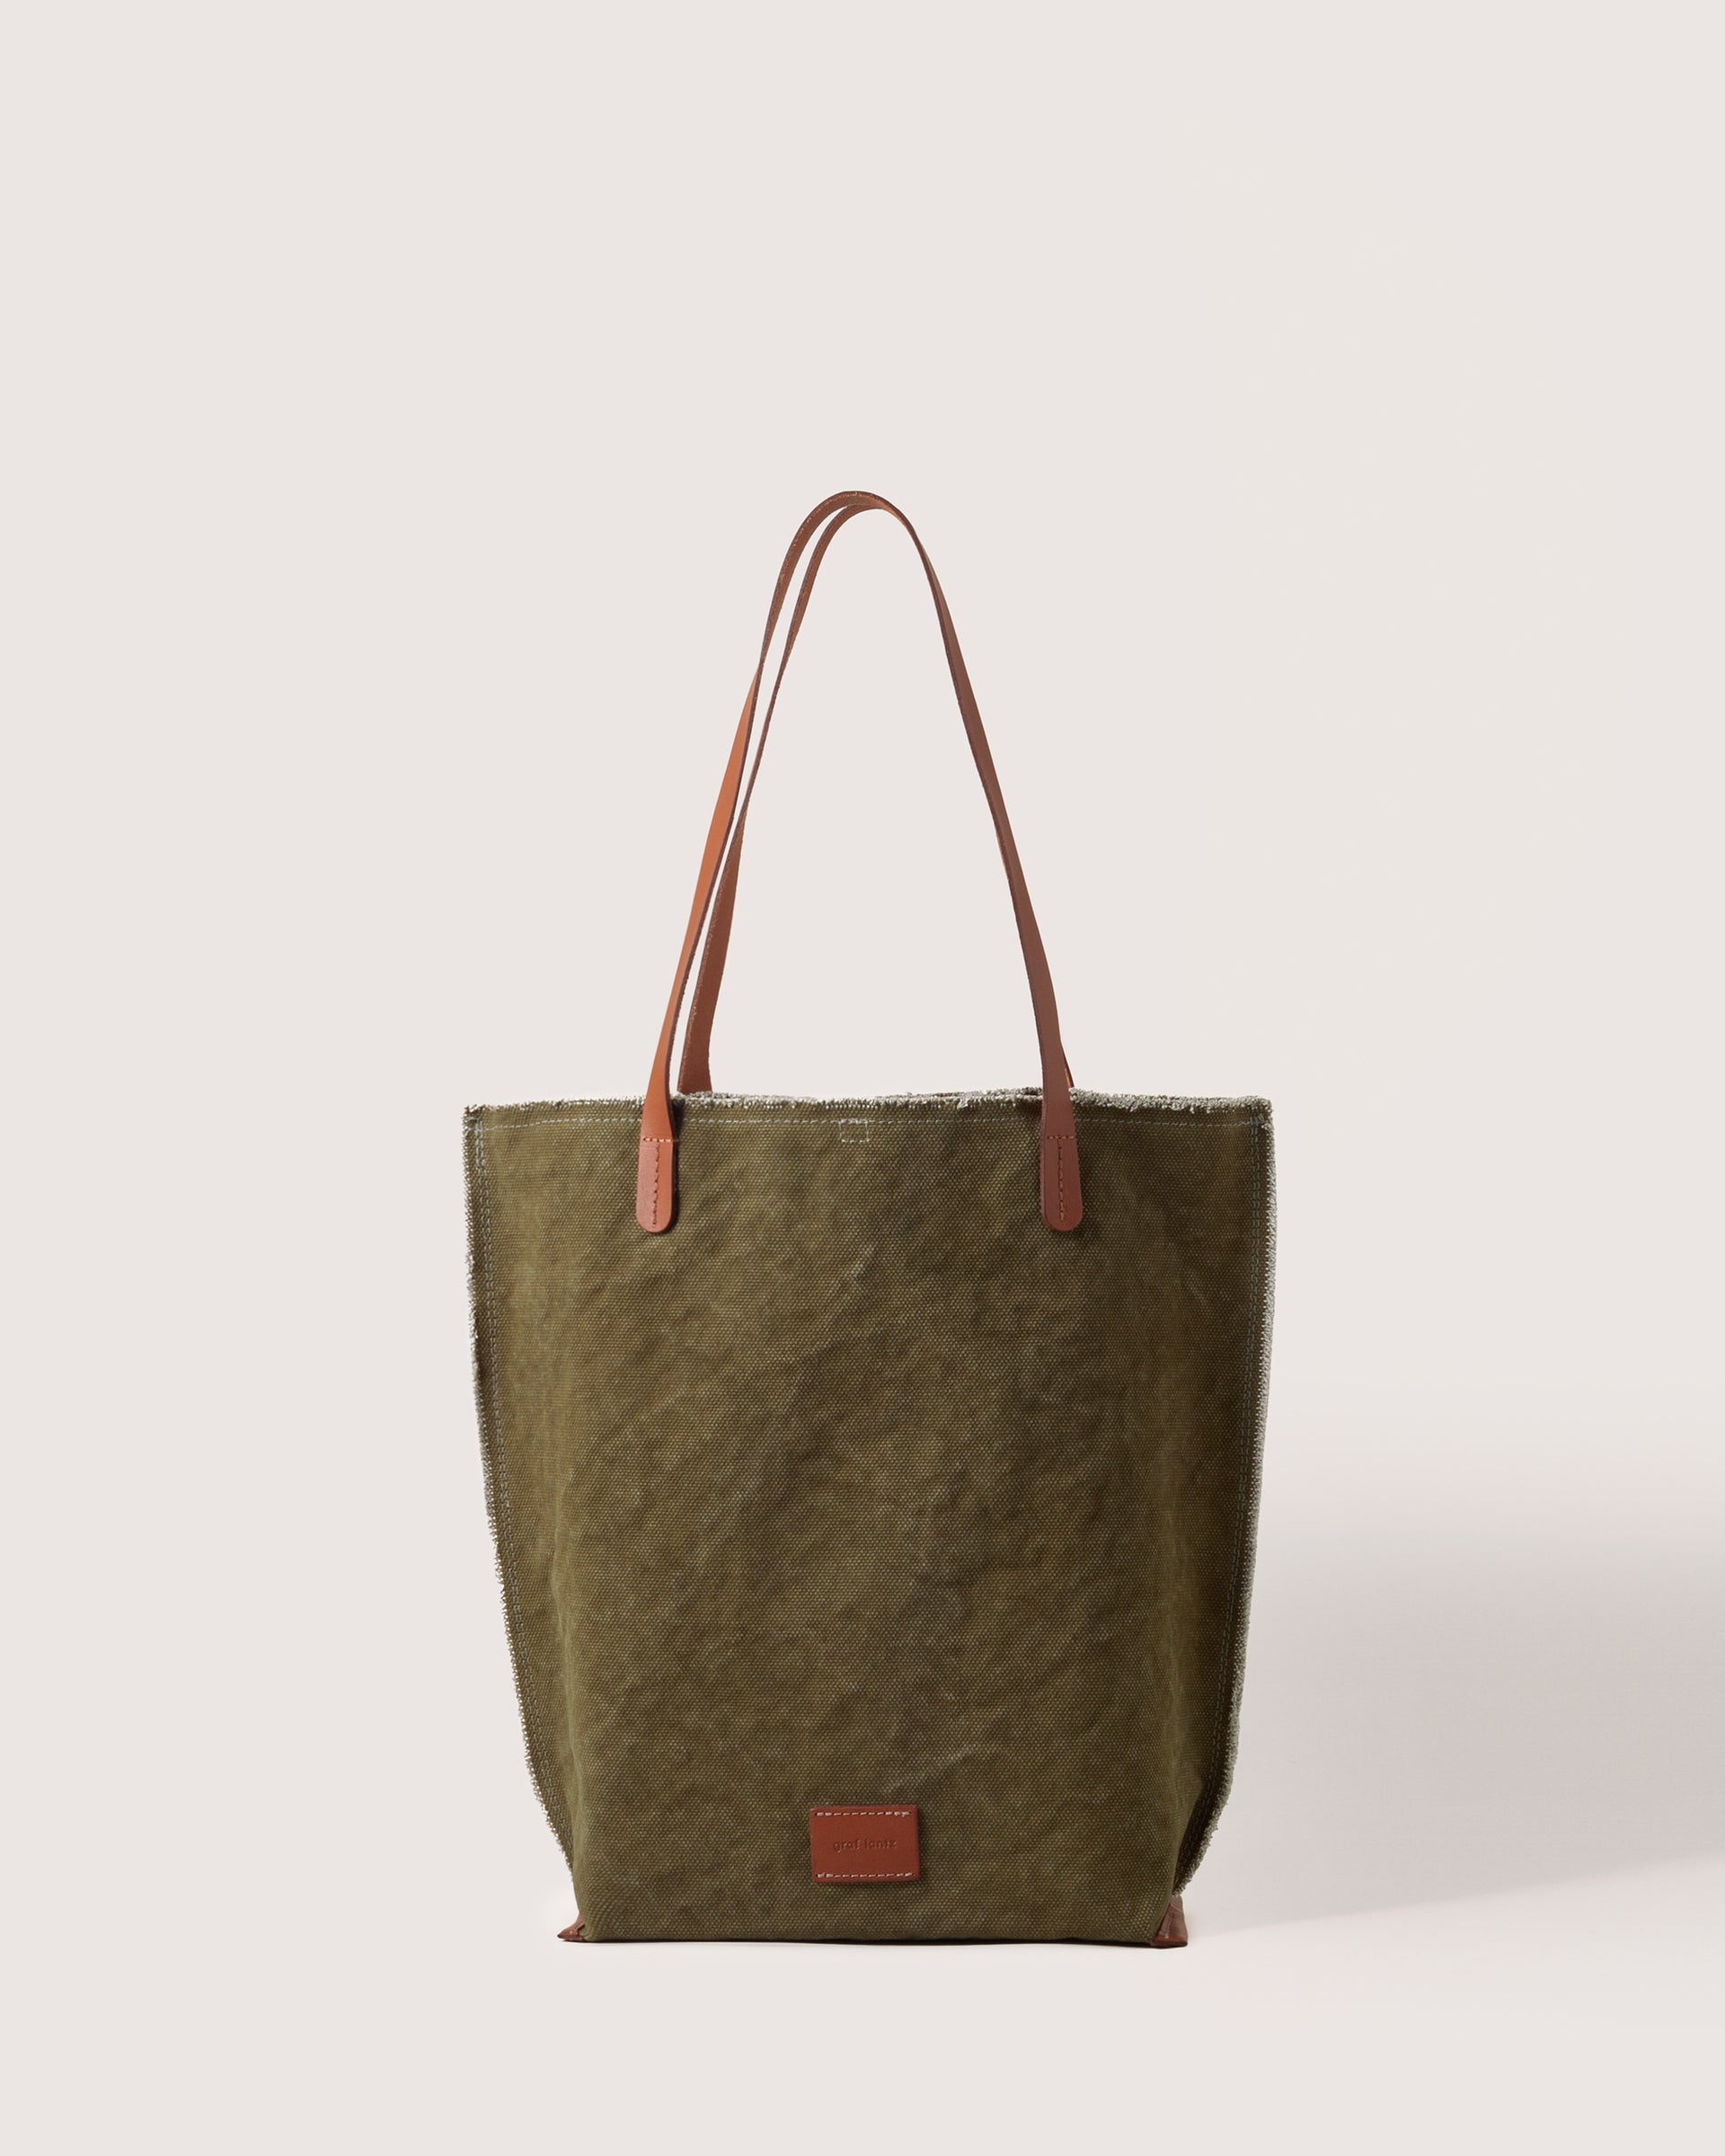 A Hana Canvas Tote in Olive Sienna with dark brown leather handle, white background